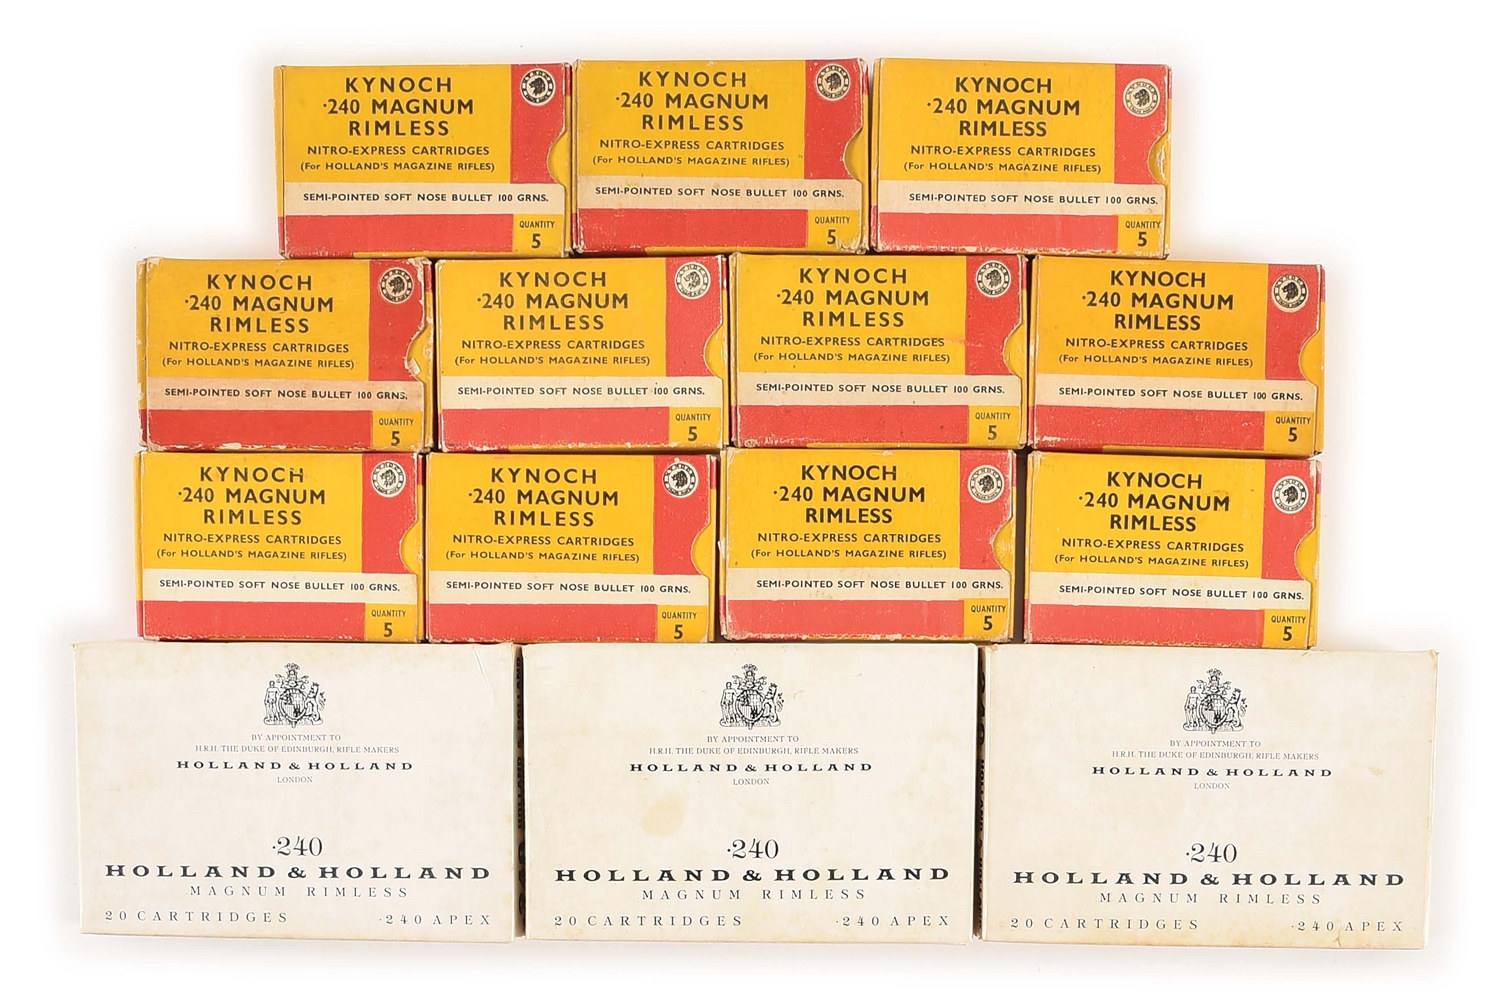 LOT OF 15: HOLLAND & HOLLAND AND KYNOCH .240 MAGNUM RIMLESS AMMUNITION.